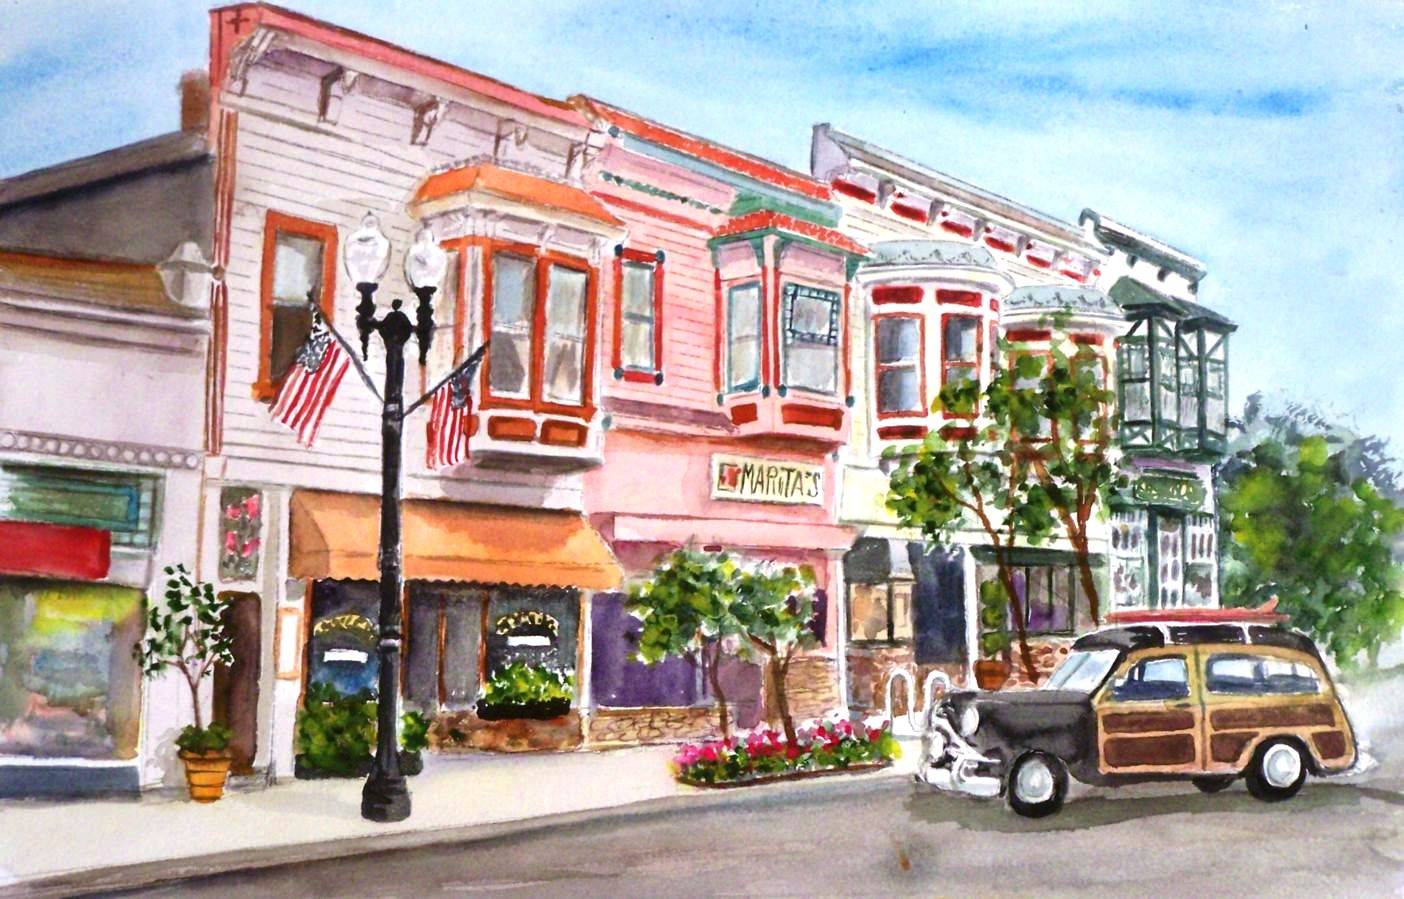 Downtown Pacific Grove